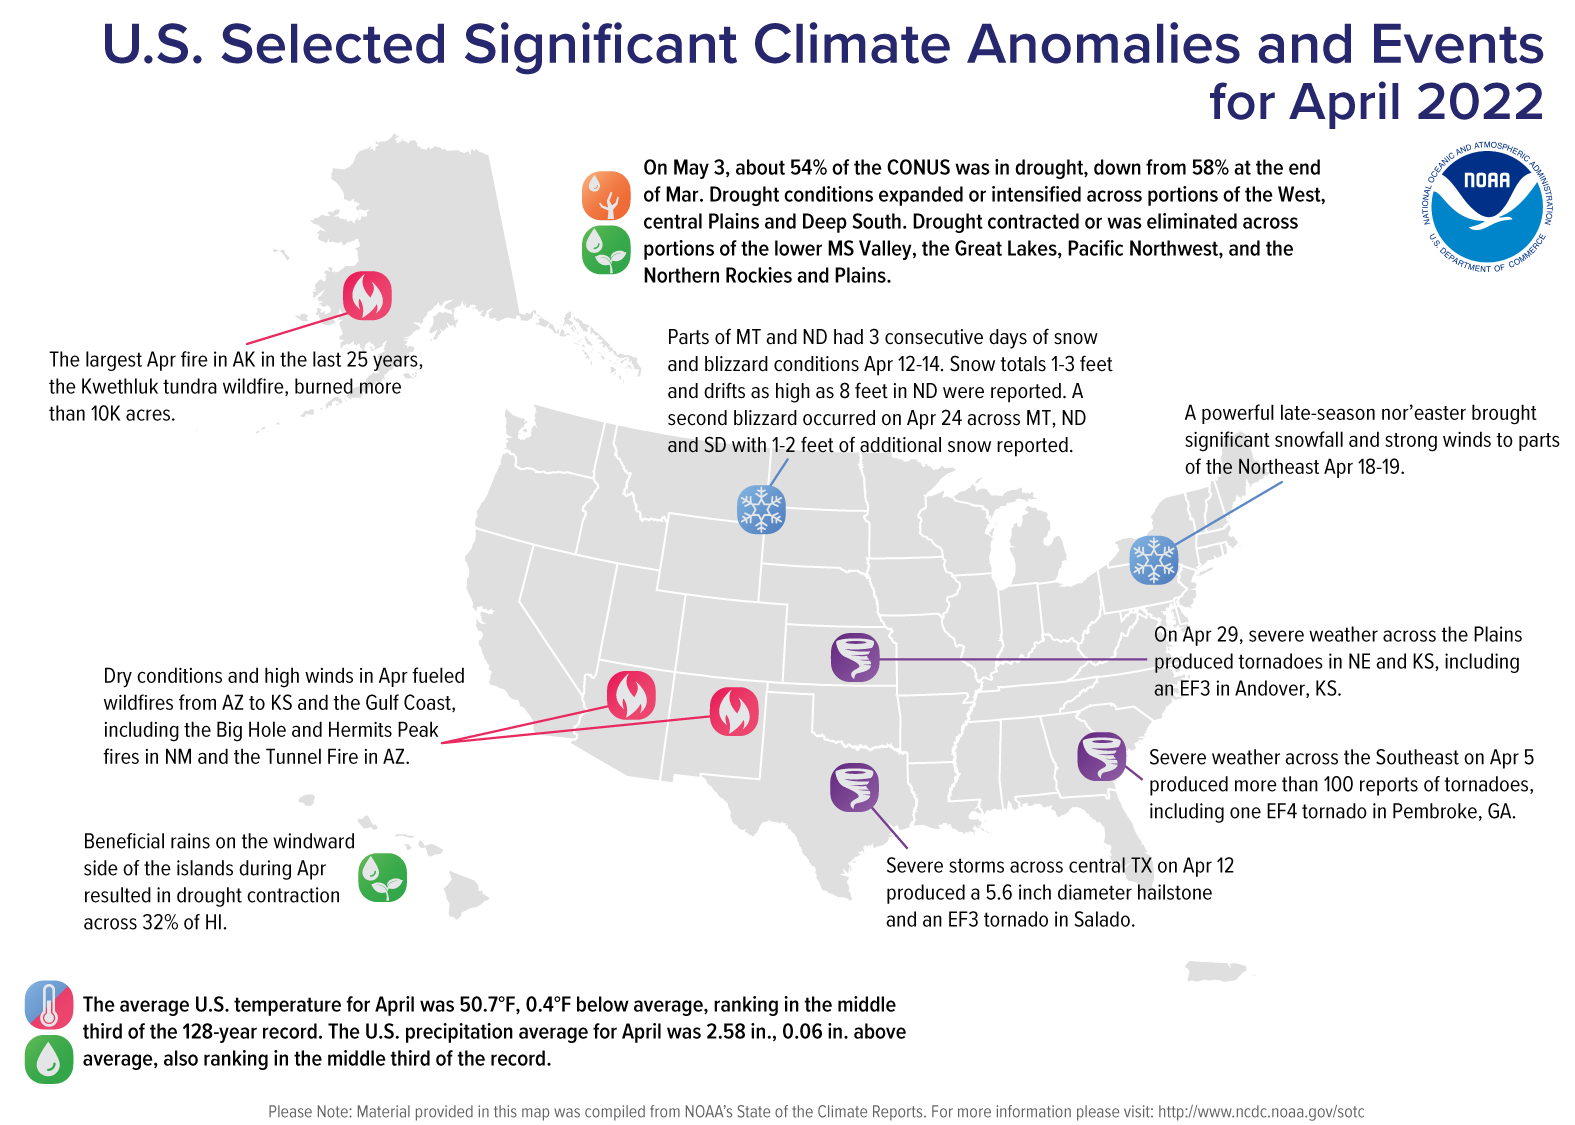 A map of the United States plotted with significant climate events that occurred during April 2022.